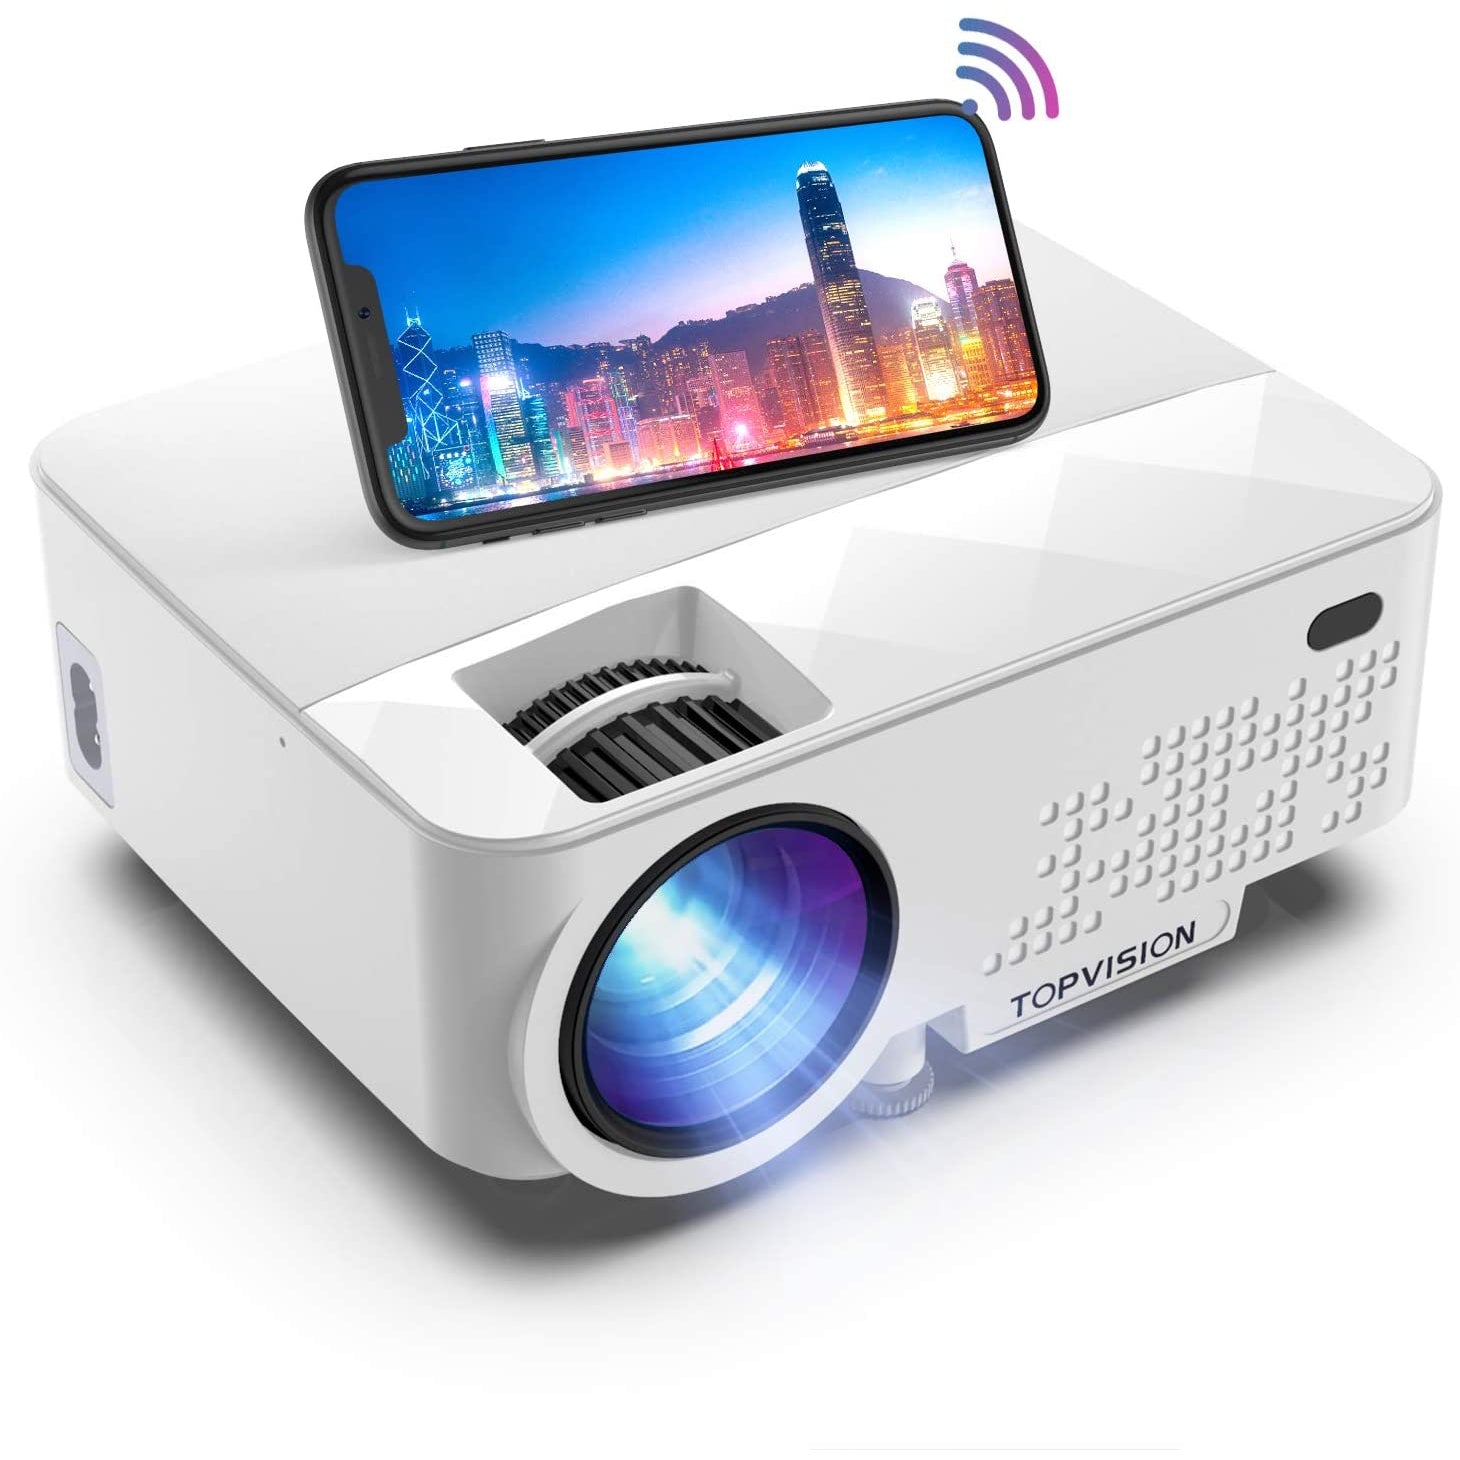 Topvision 6000 Mini Video Projector with Synchronize Smartphone Screen, 240" Display,Full HD 1080P Portable Home Cinema Projectors